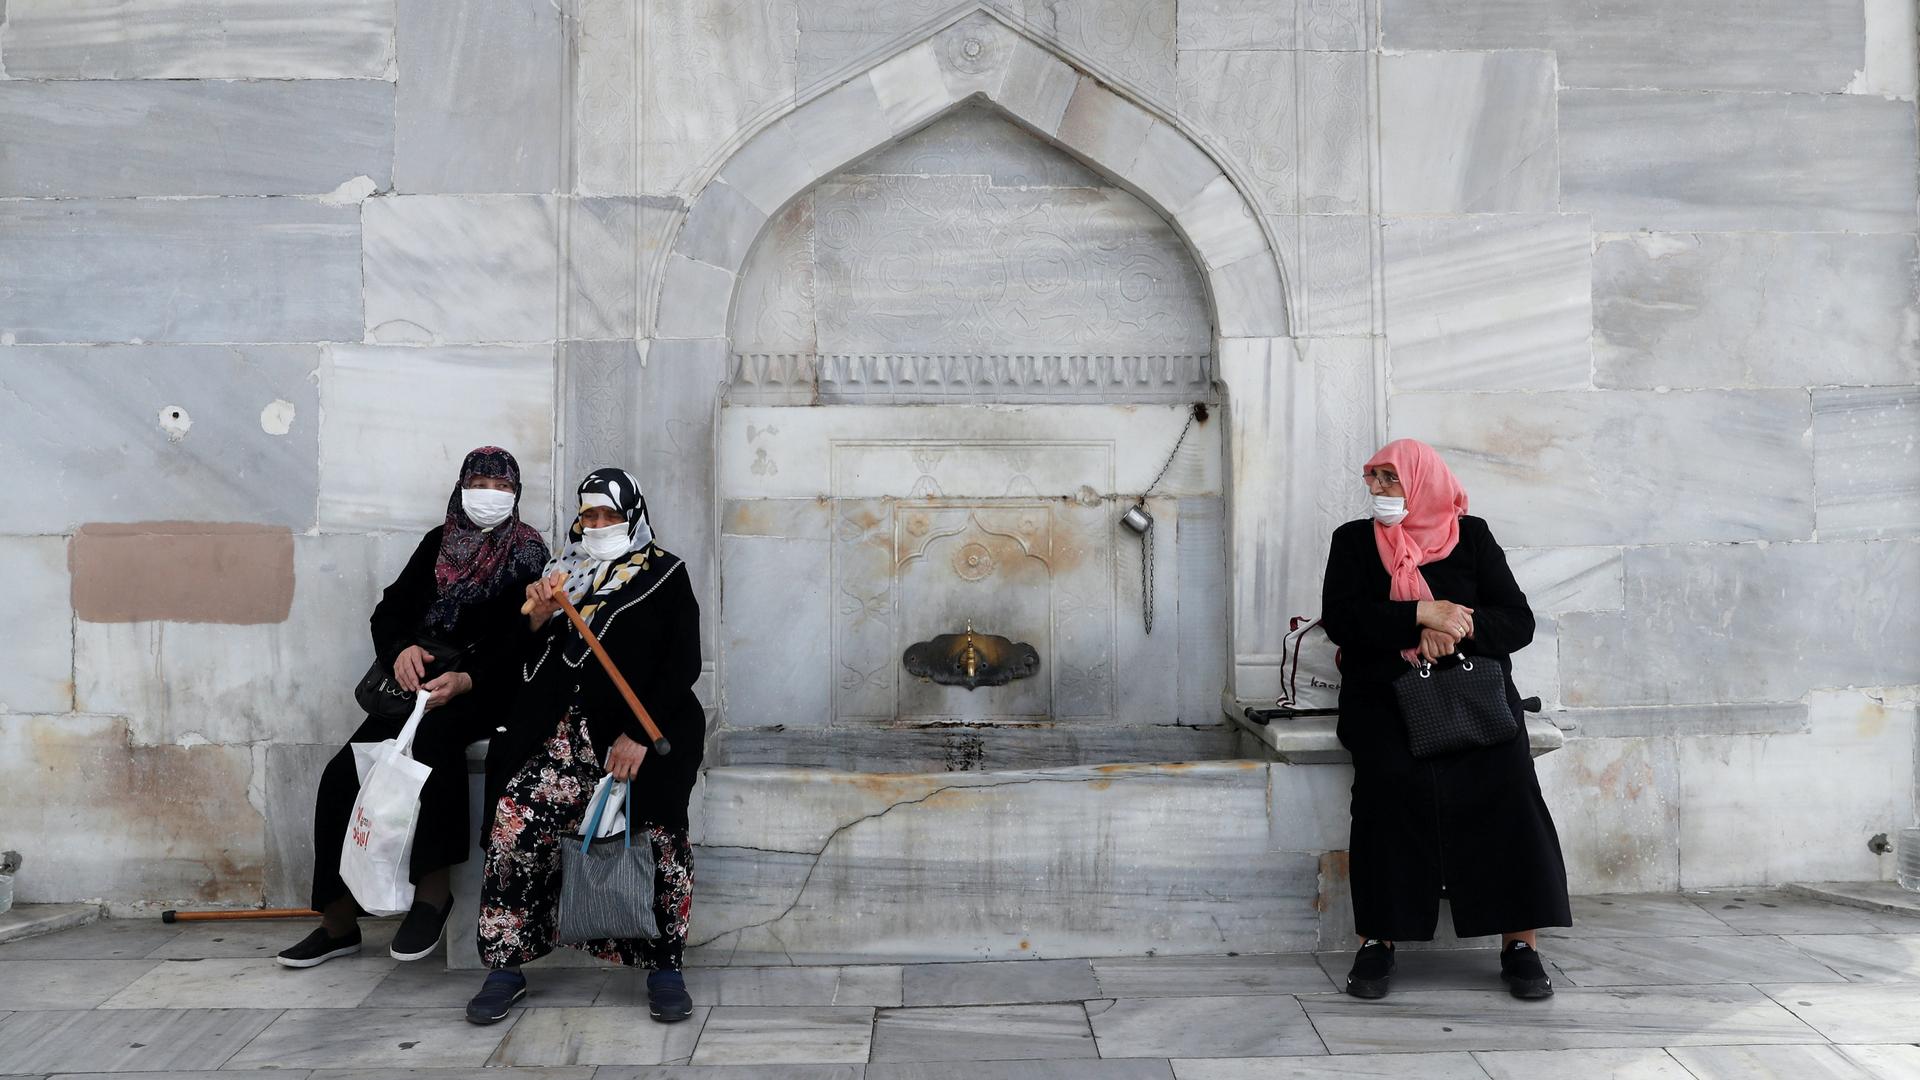 Three women wearing head scarves, long jackets and masks by a gray fountain 